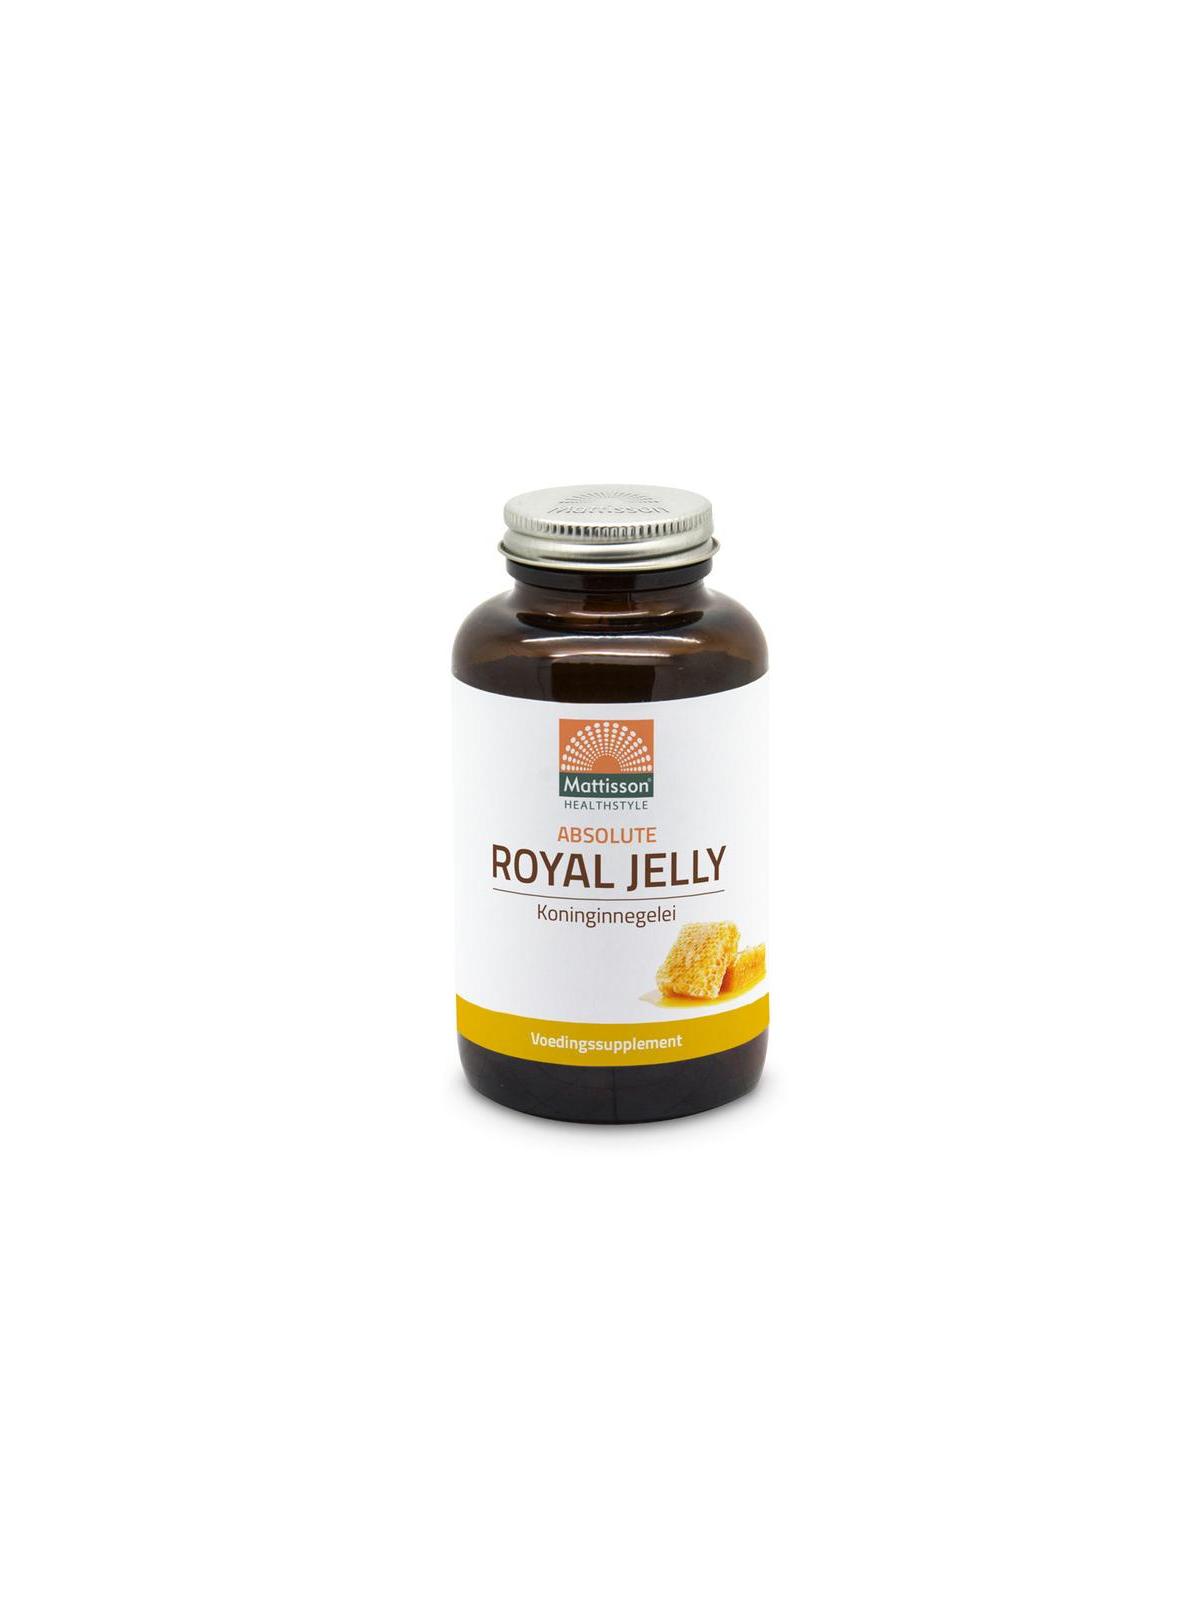 Absolute royal jelly 1000 mg